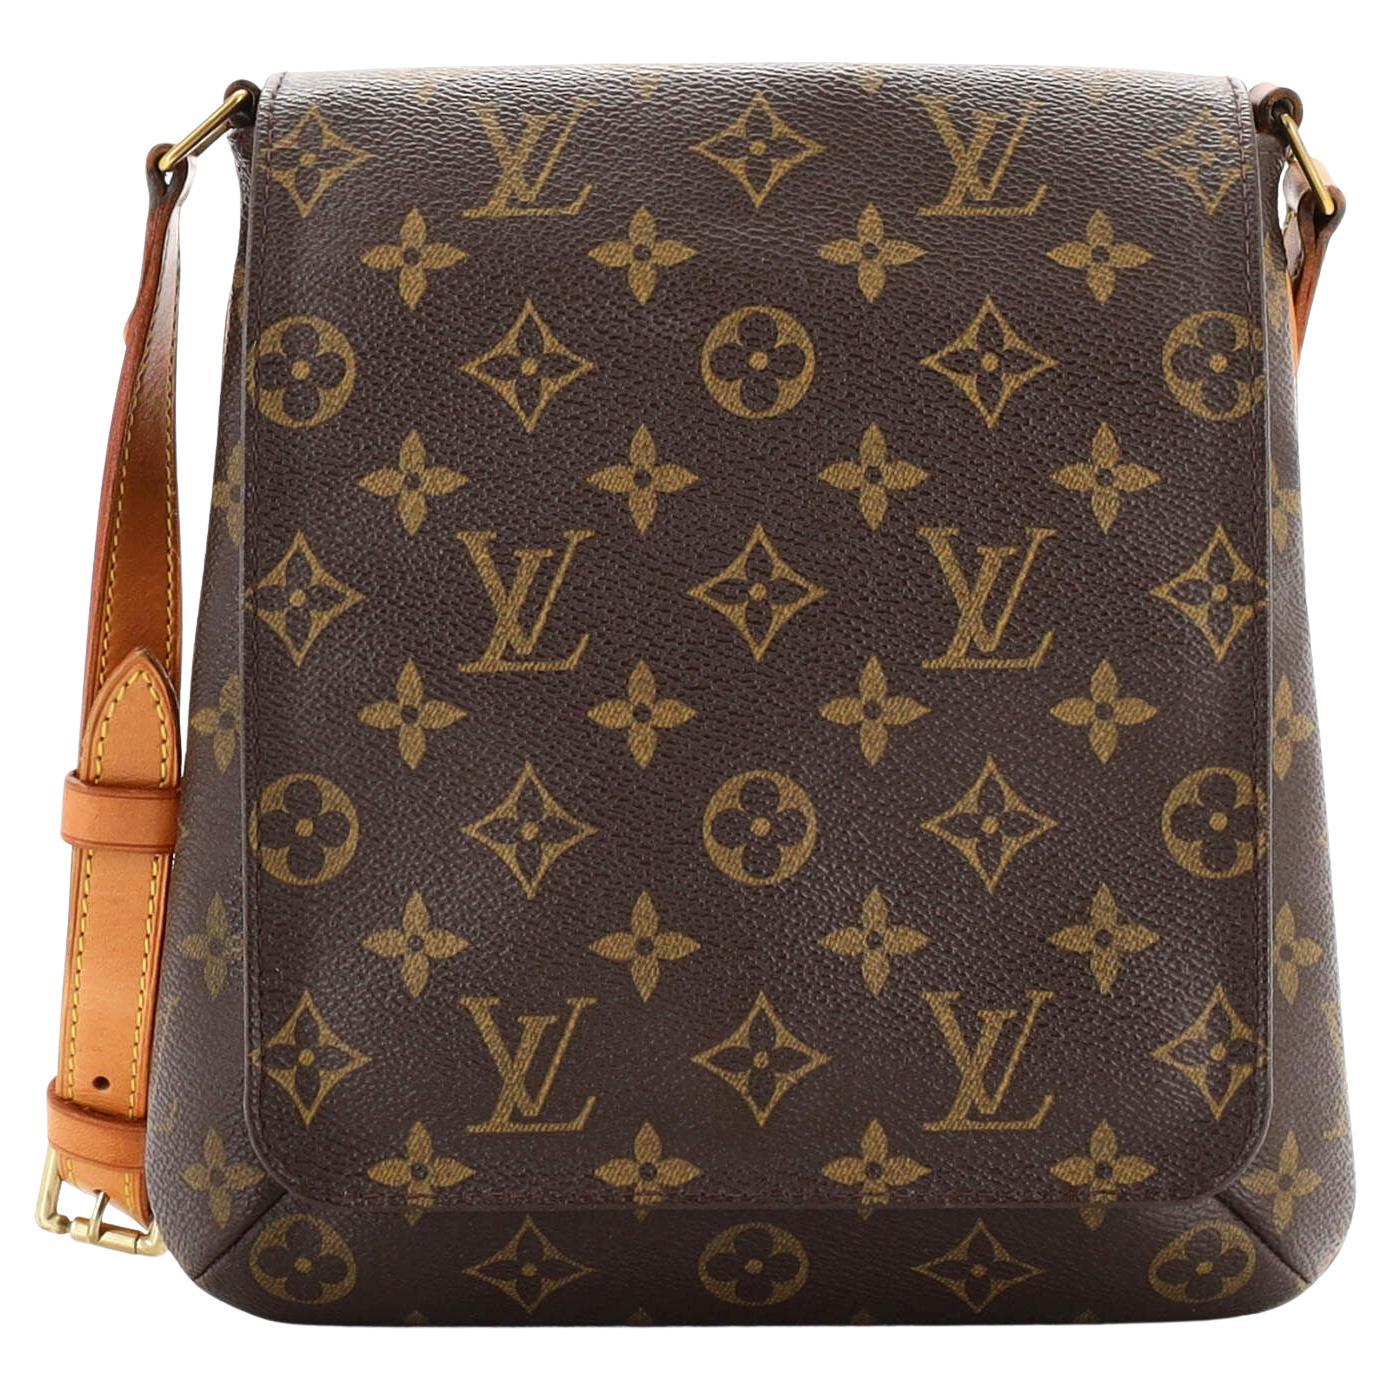 Shop for Louis Vuitton Monogram Canvas Leather Musette Salsa PM Shoulder Bag  - Shipped from USA